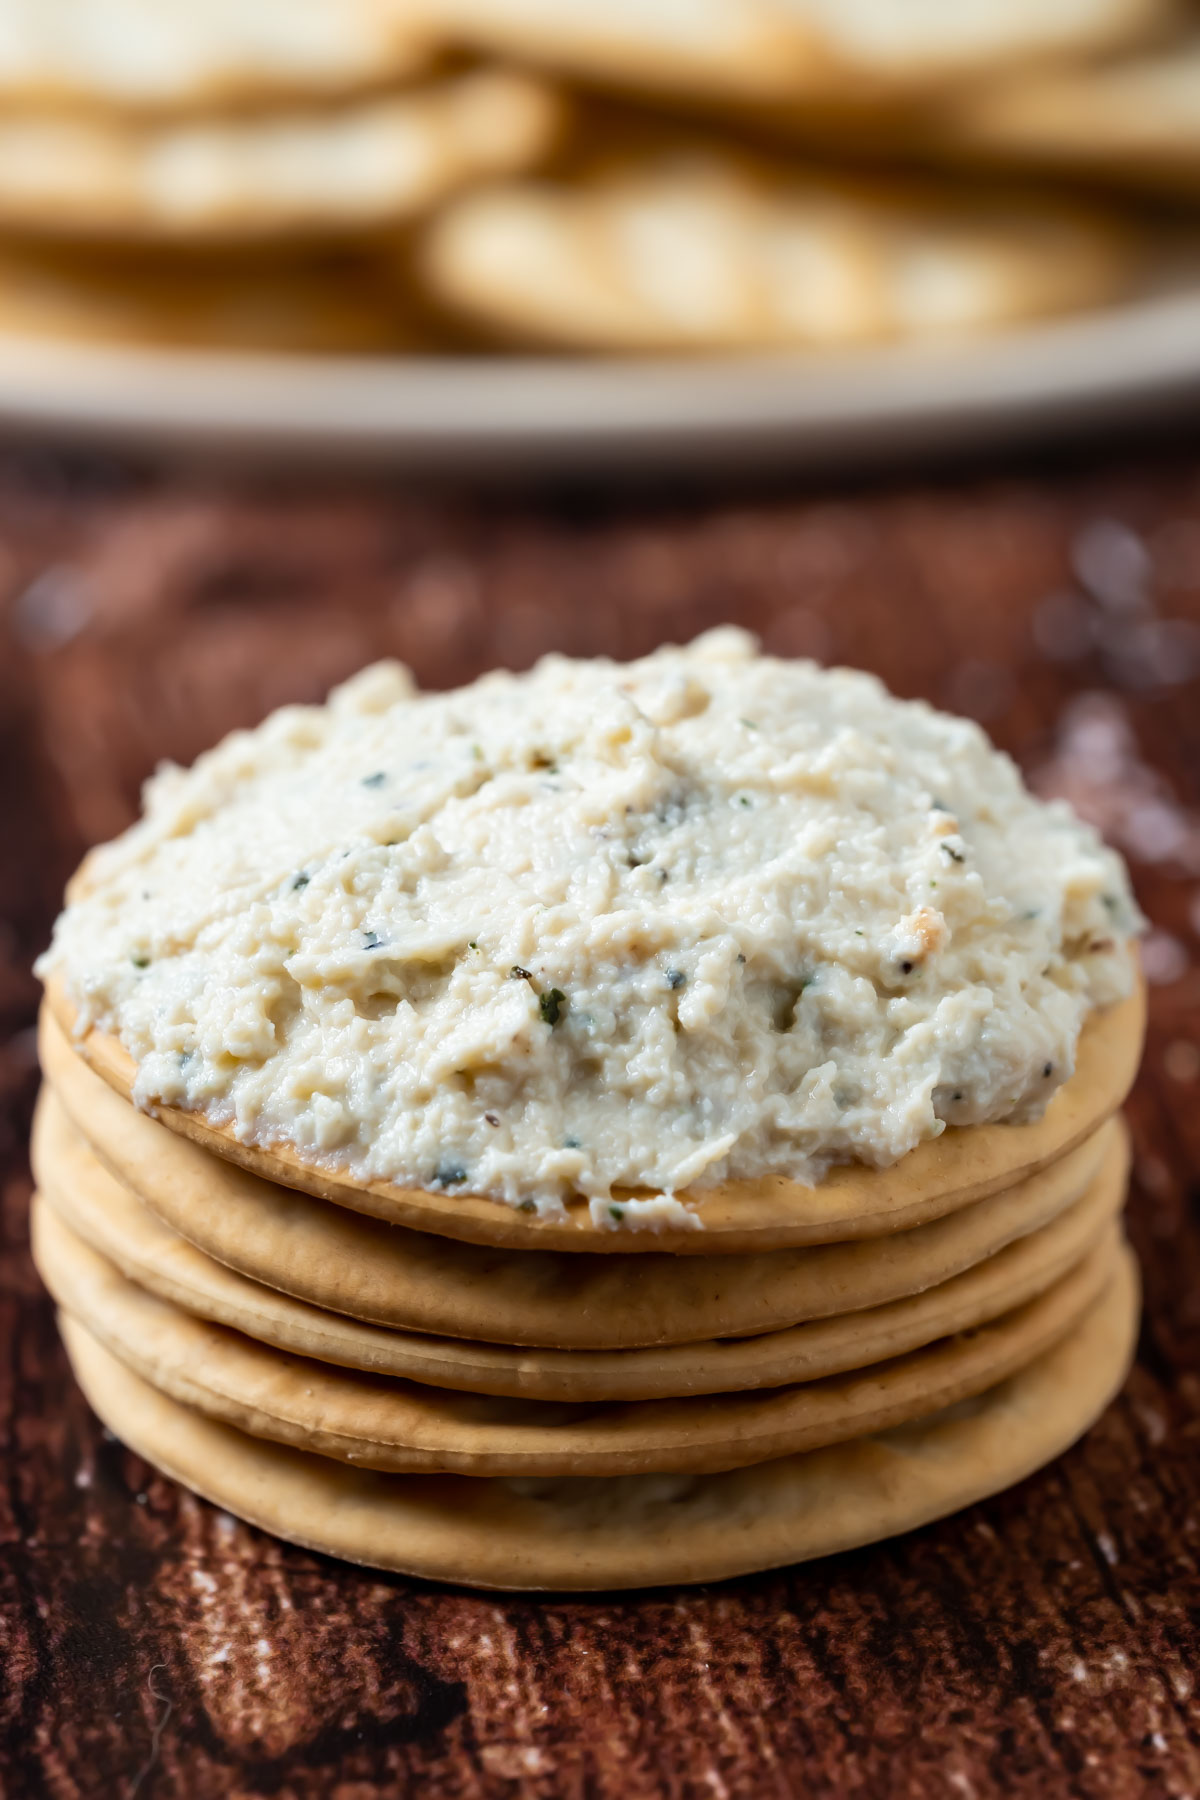 Tofu ricotta spread on a stack of crackers.